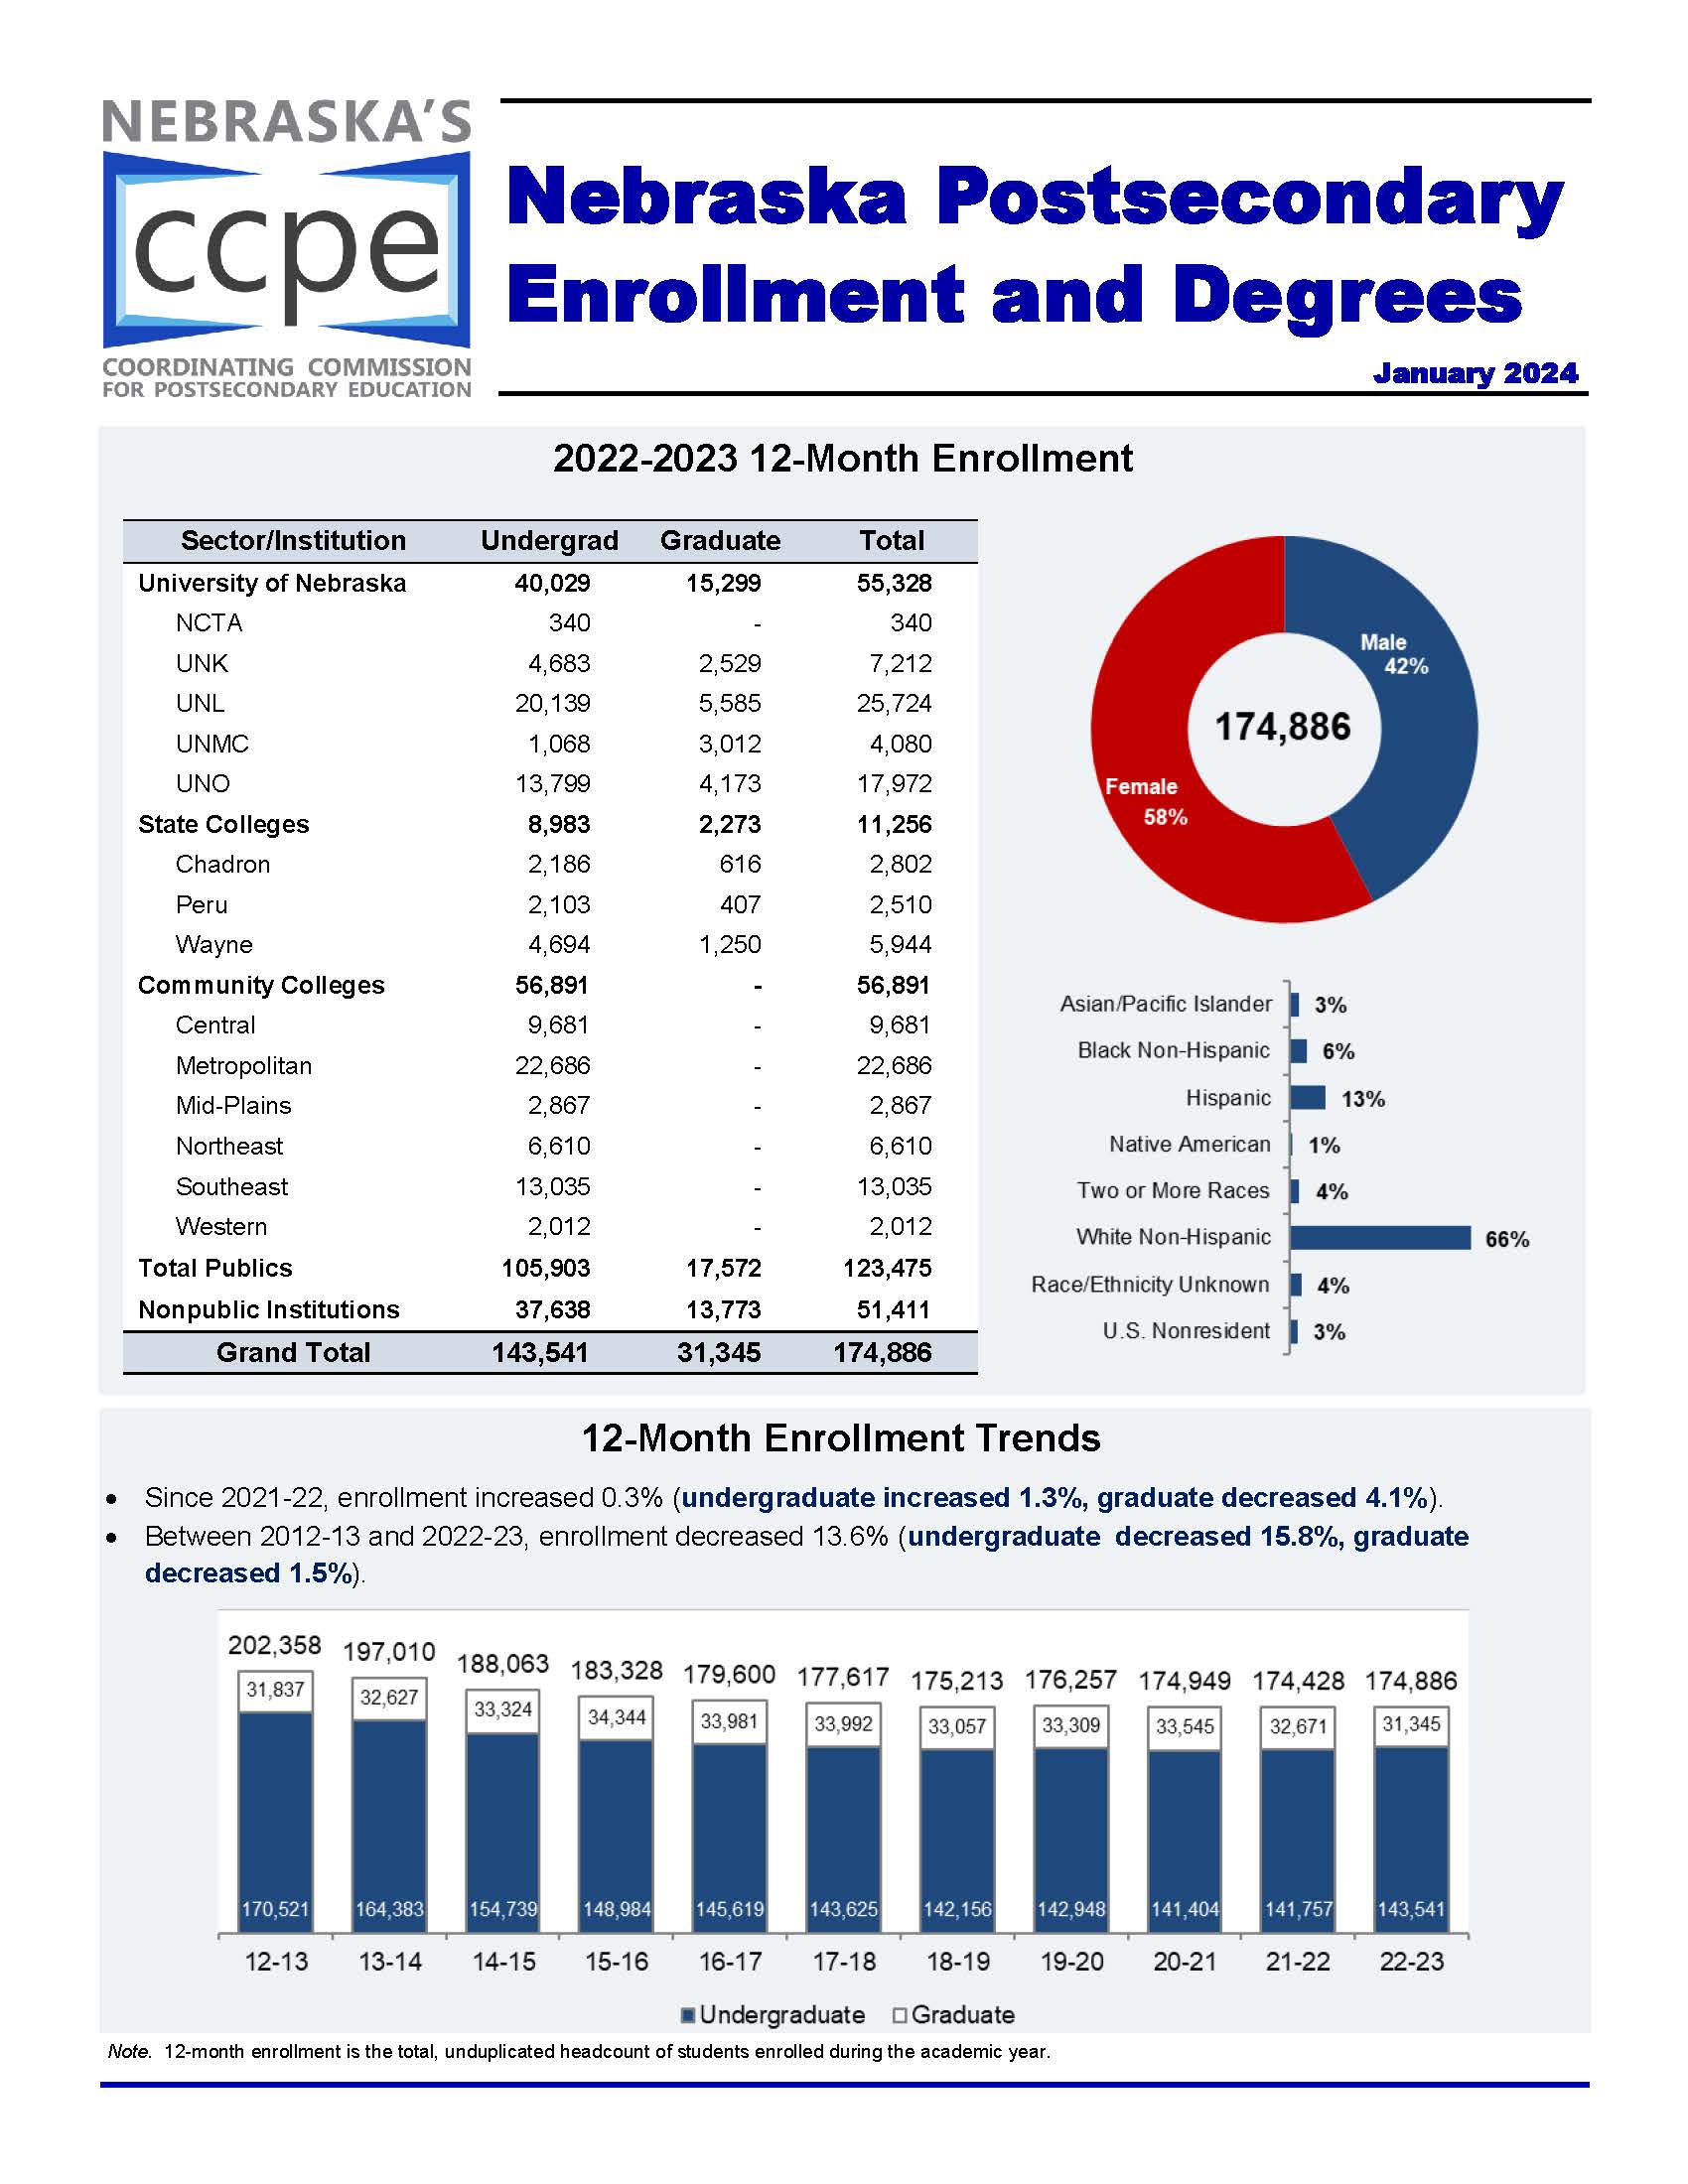 Enrollment and Degrees